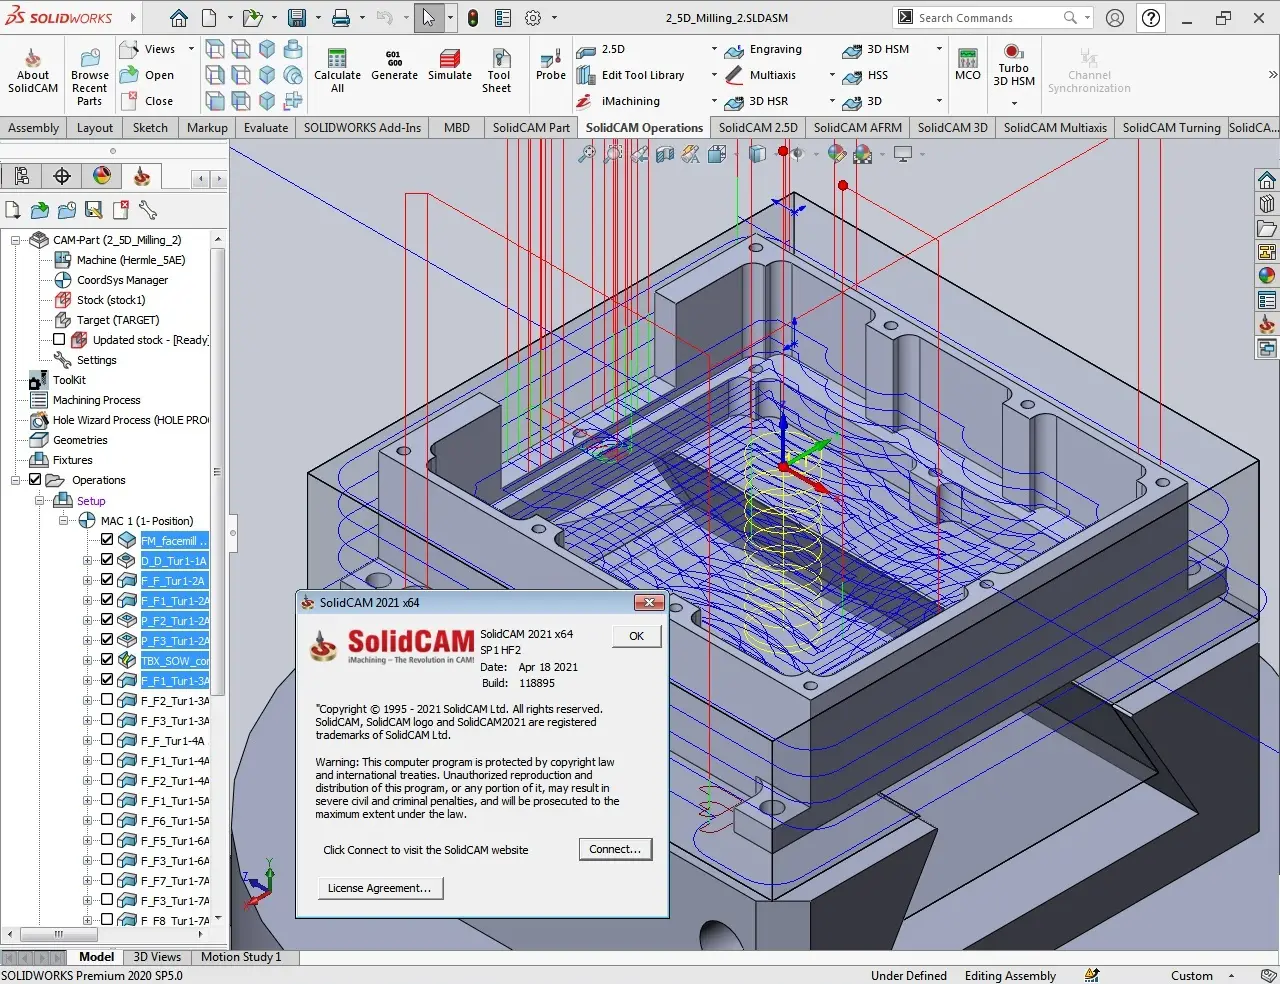 download the last version for android SolidCAM for SolidWorks 2023 SP1 HF1